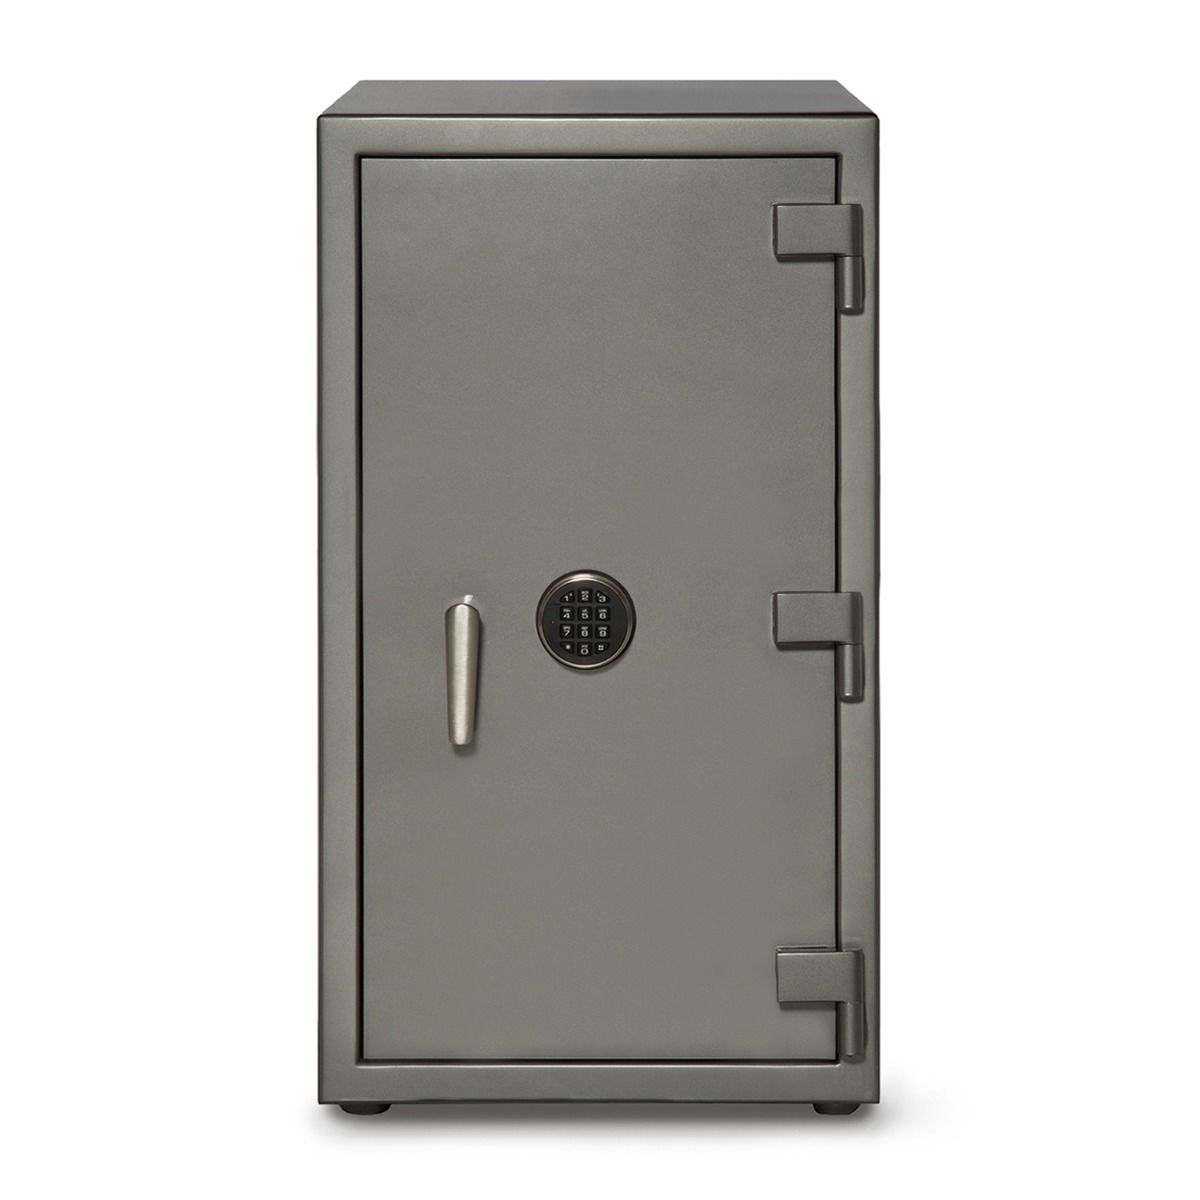 A luxury watch safe from WOLF, established in 1834. The interior features multiple watch winders, a digital display for settings, and storage drawers. The exterior is finished in a sleek grey with the brand name prominently displayed